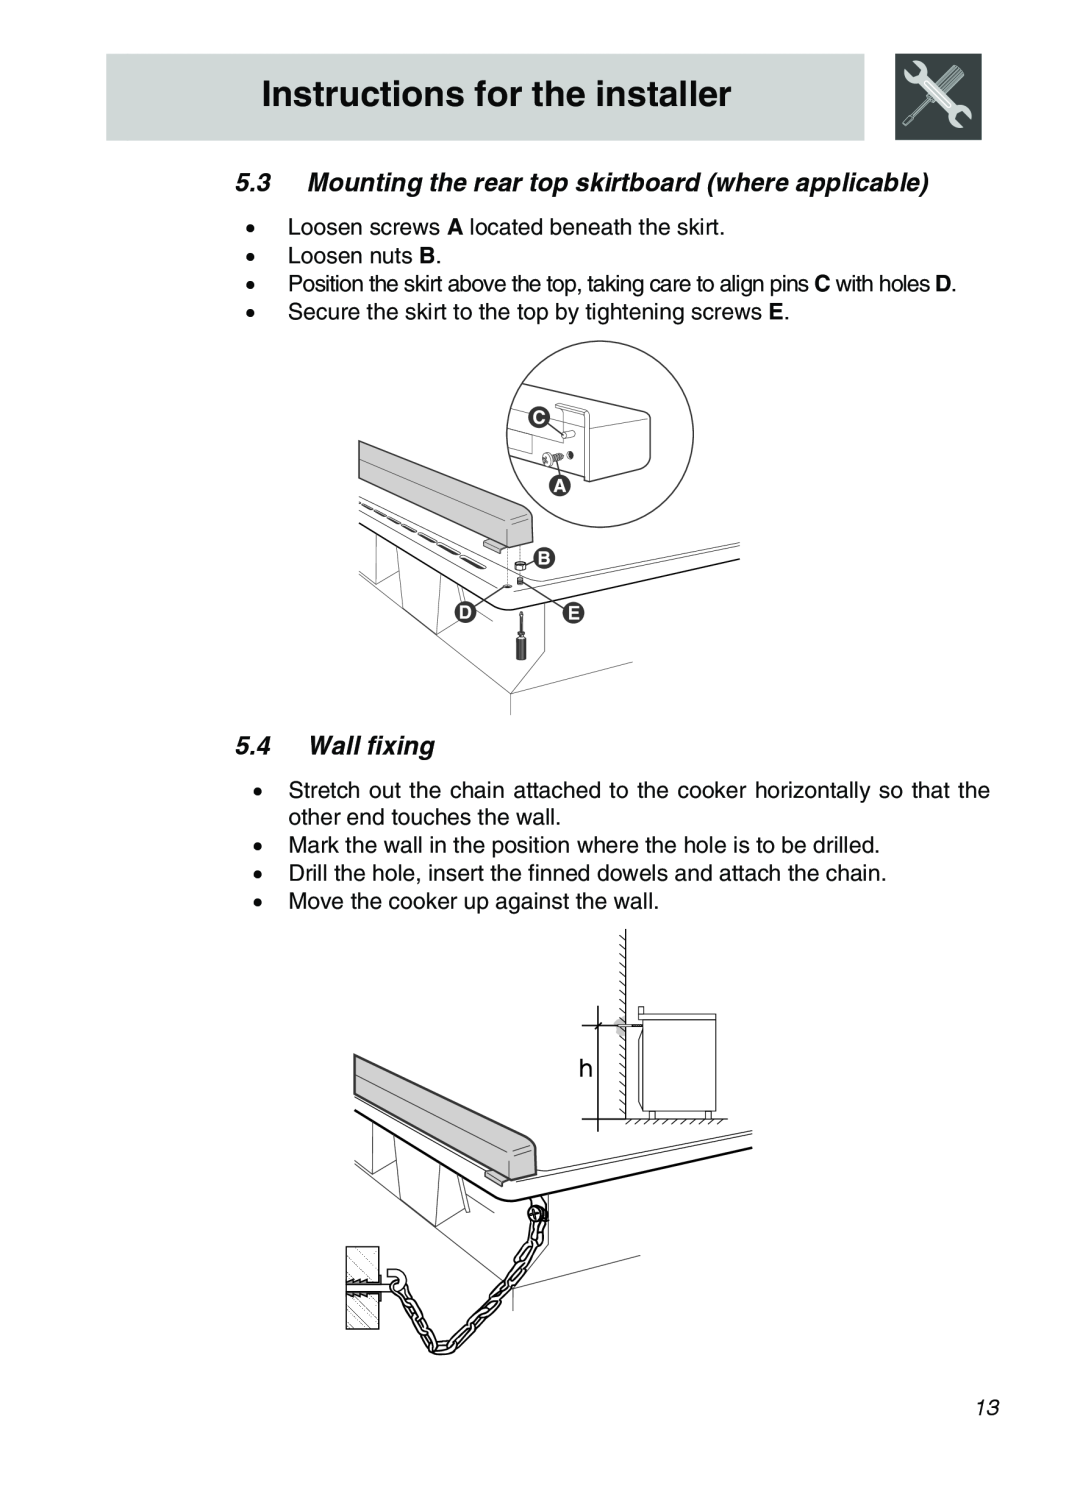 Smeg SA9065LPG, SA9066 Mounting the rear top skirtboard where applicable, Wall fixing, Instructions for the installer 